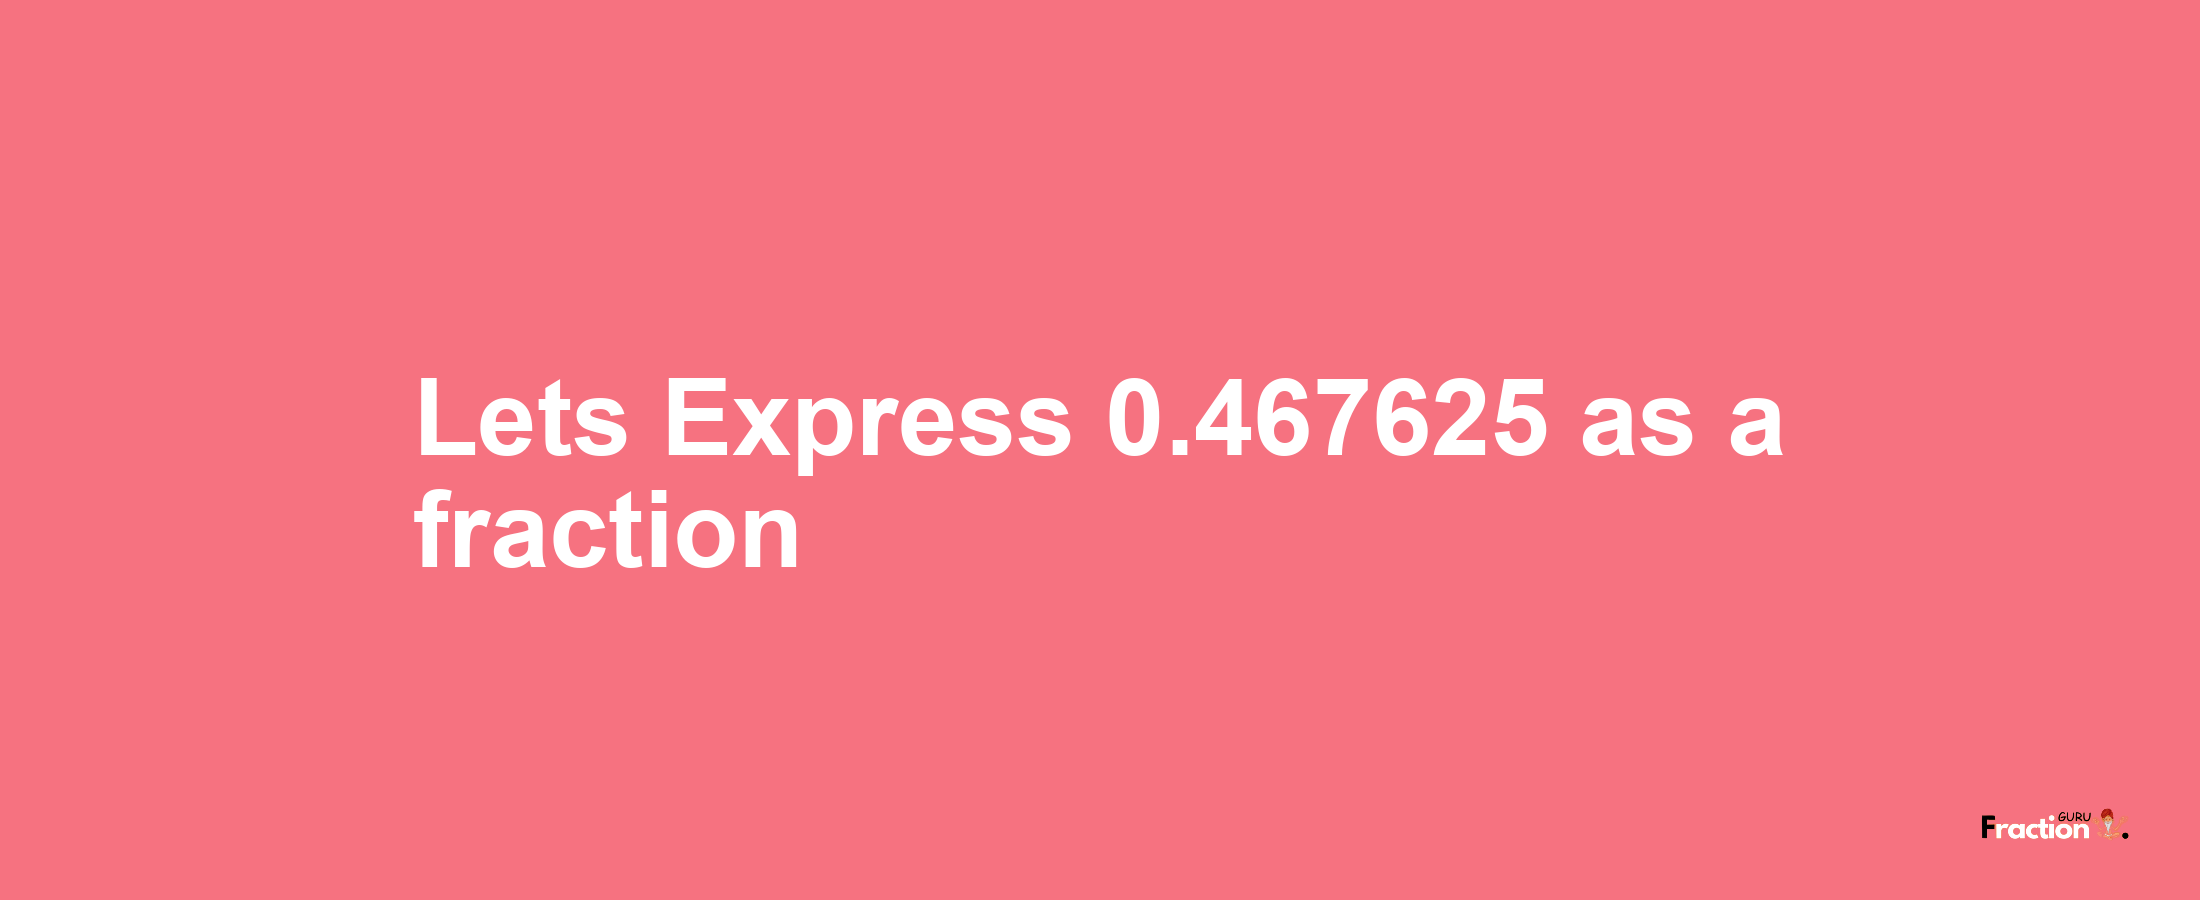 Lets Express 0.467625 as afraction